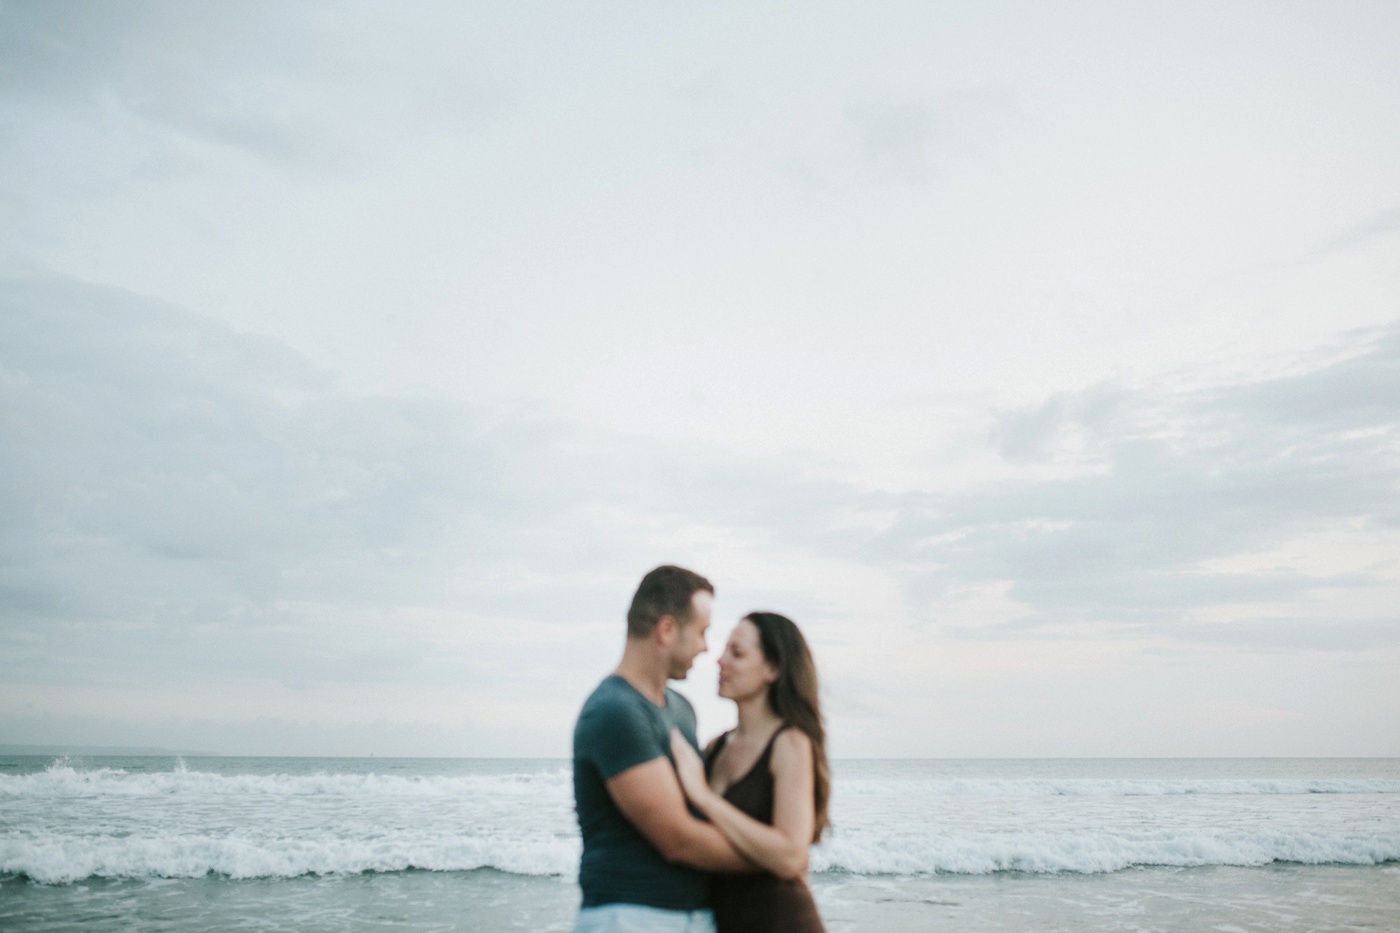 Deb-Ibs_Bali-Beach-Relaxed-Engagement-Session_Destination-Wedding-Photography_Melbourne-Wedding-Photographer_27